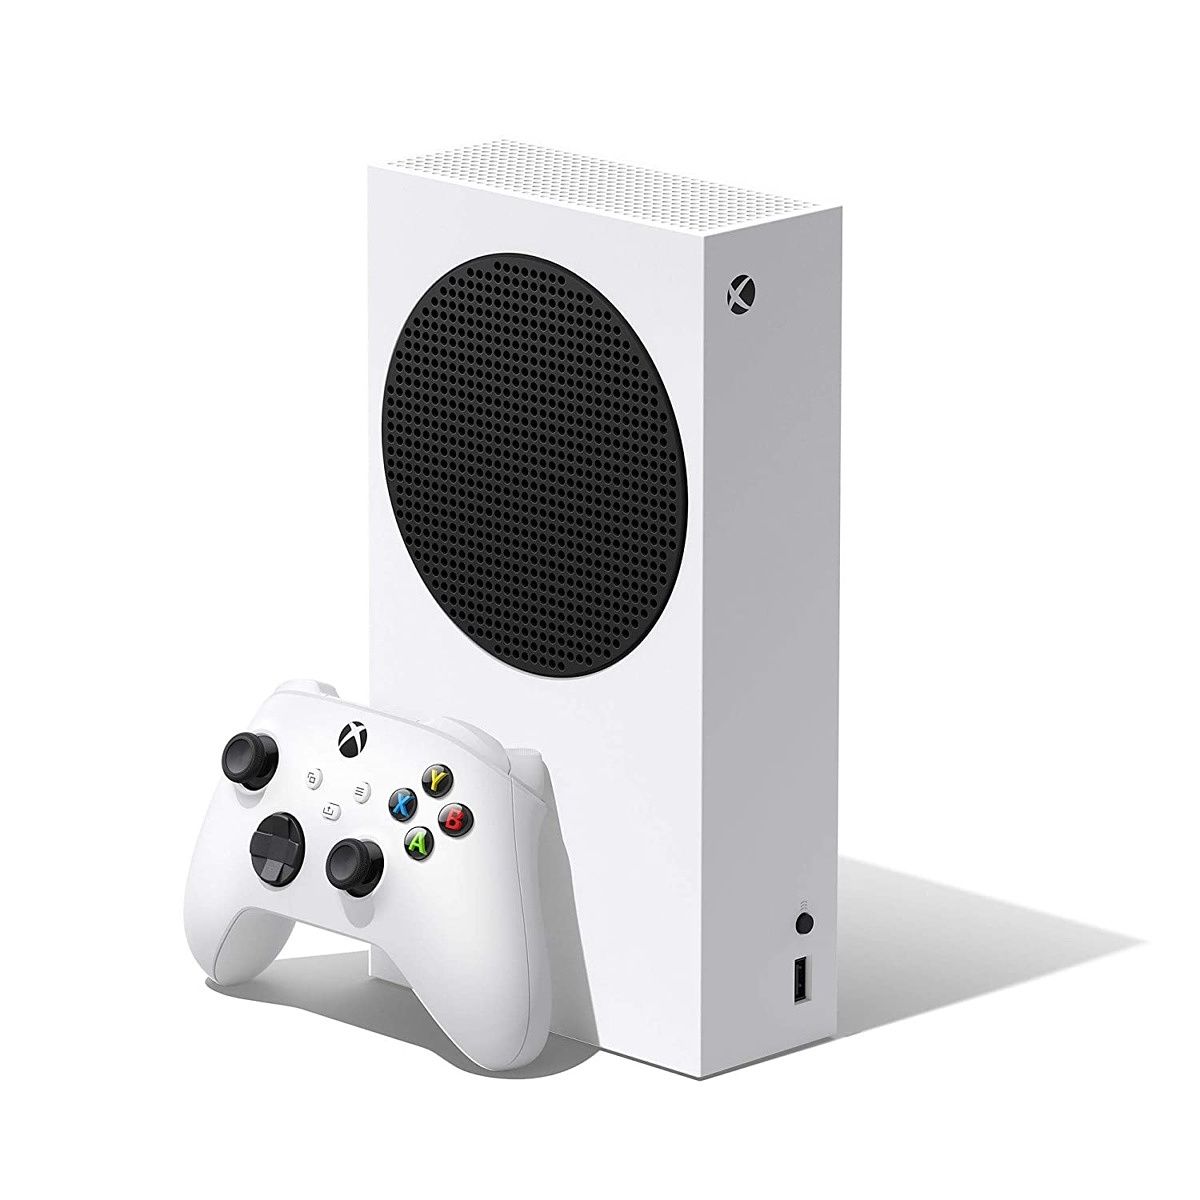 Microsoft's cheapest new-generation console brings many of the Series X's advantages to the table in a smaller, more affordable package.